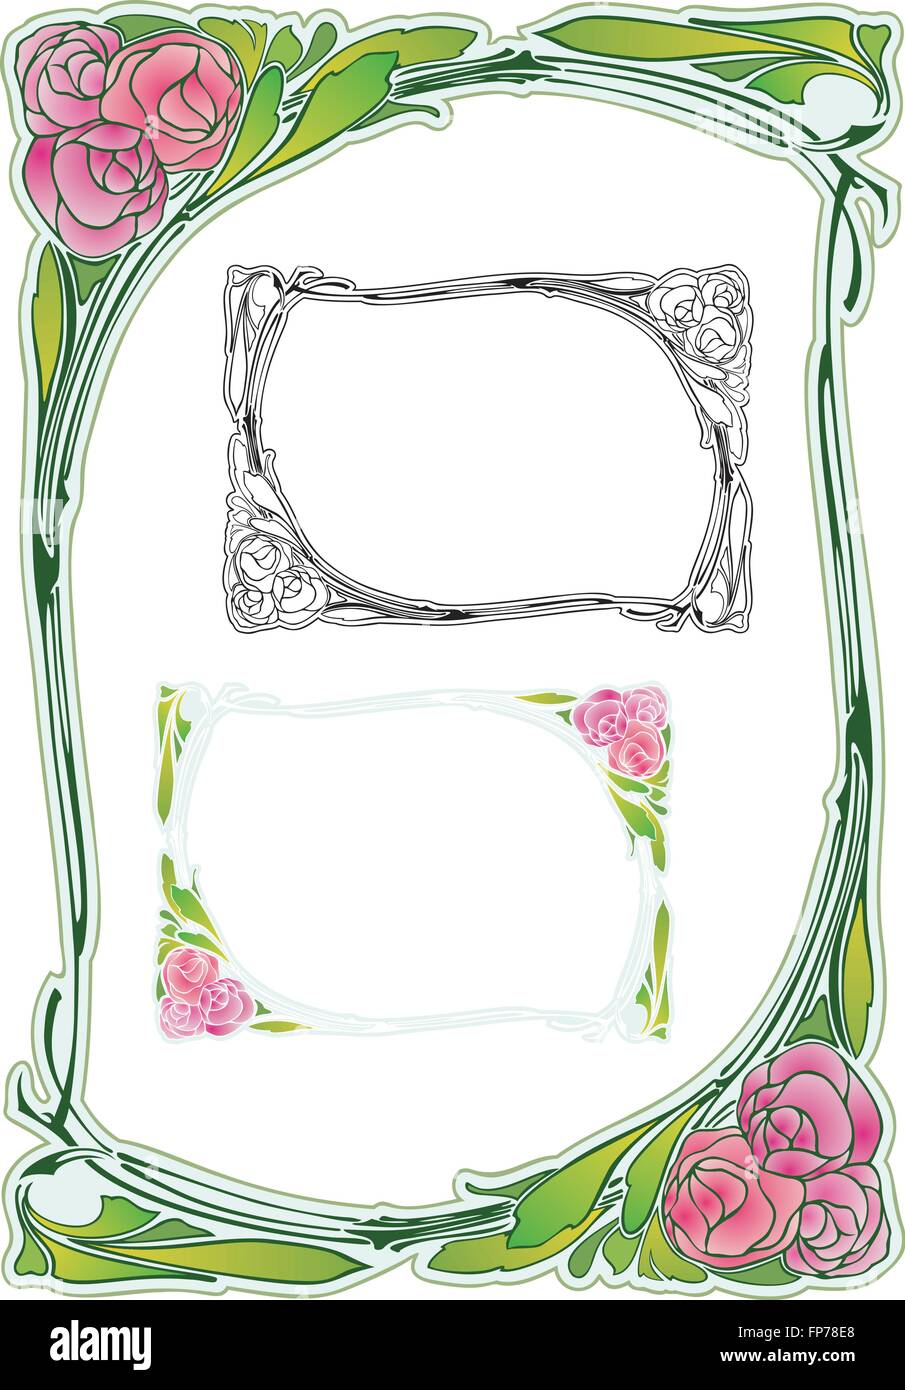 art nouveau style border with peony flowers Stock Image